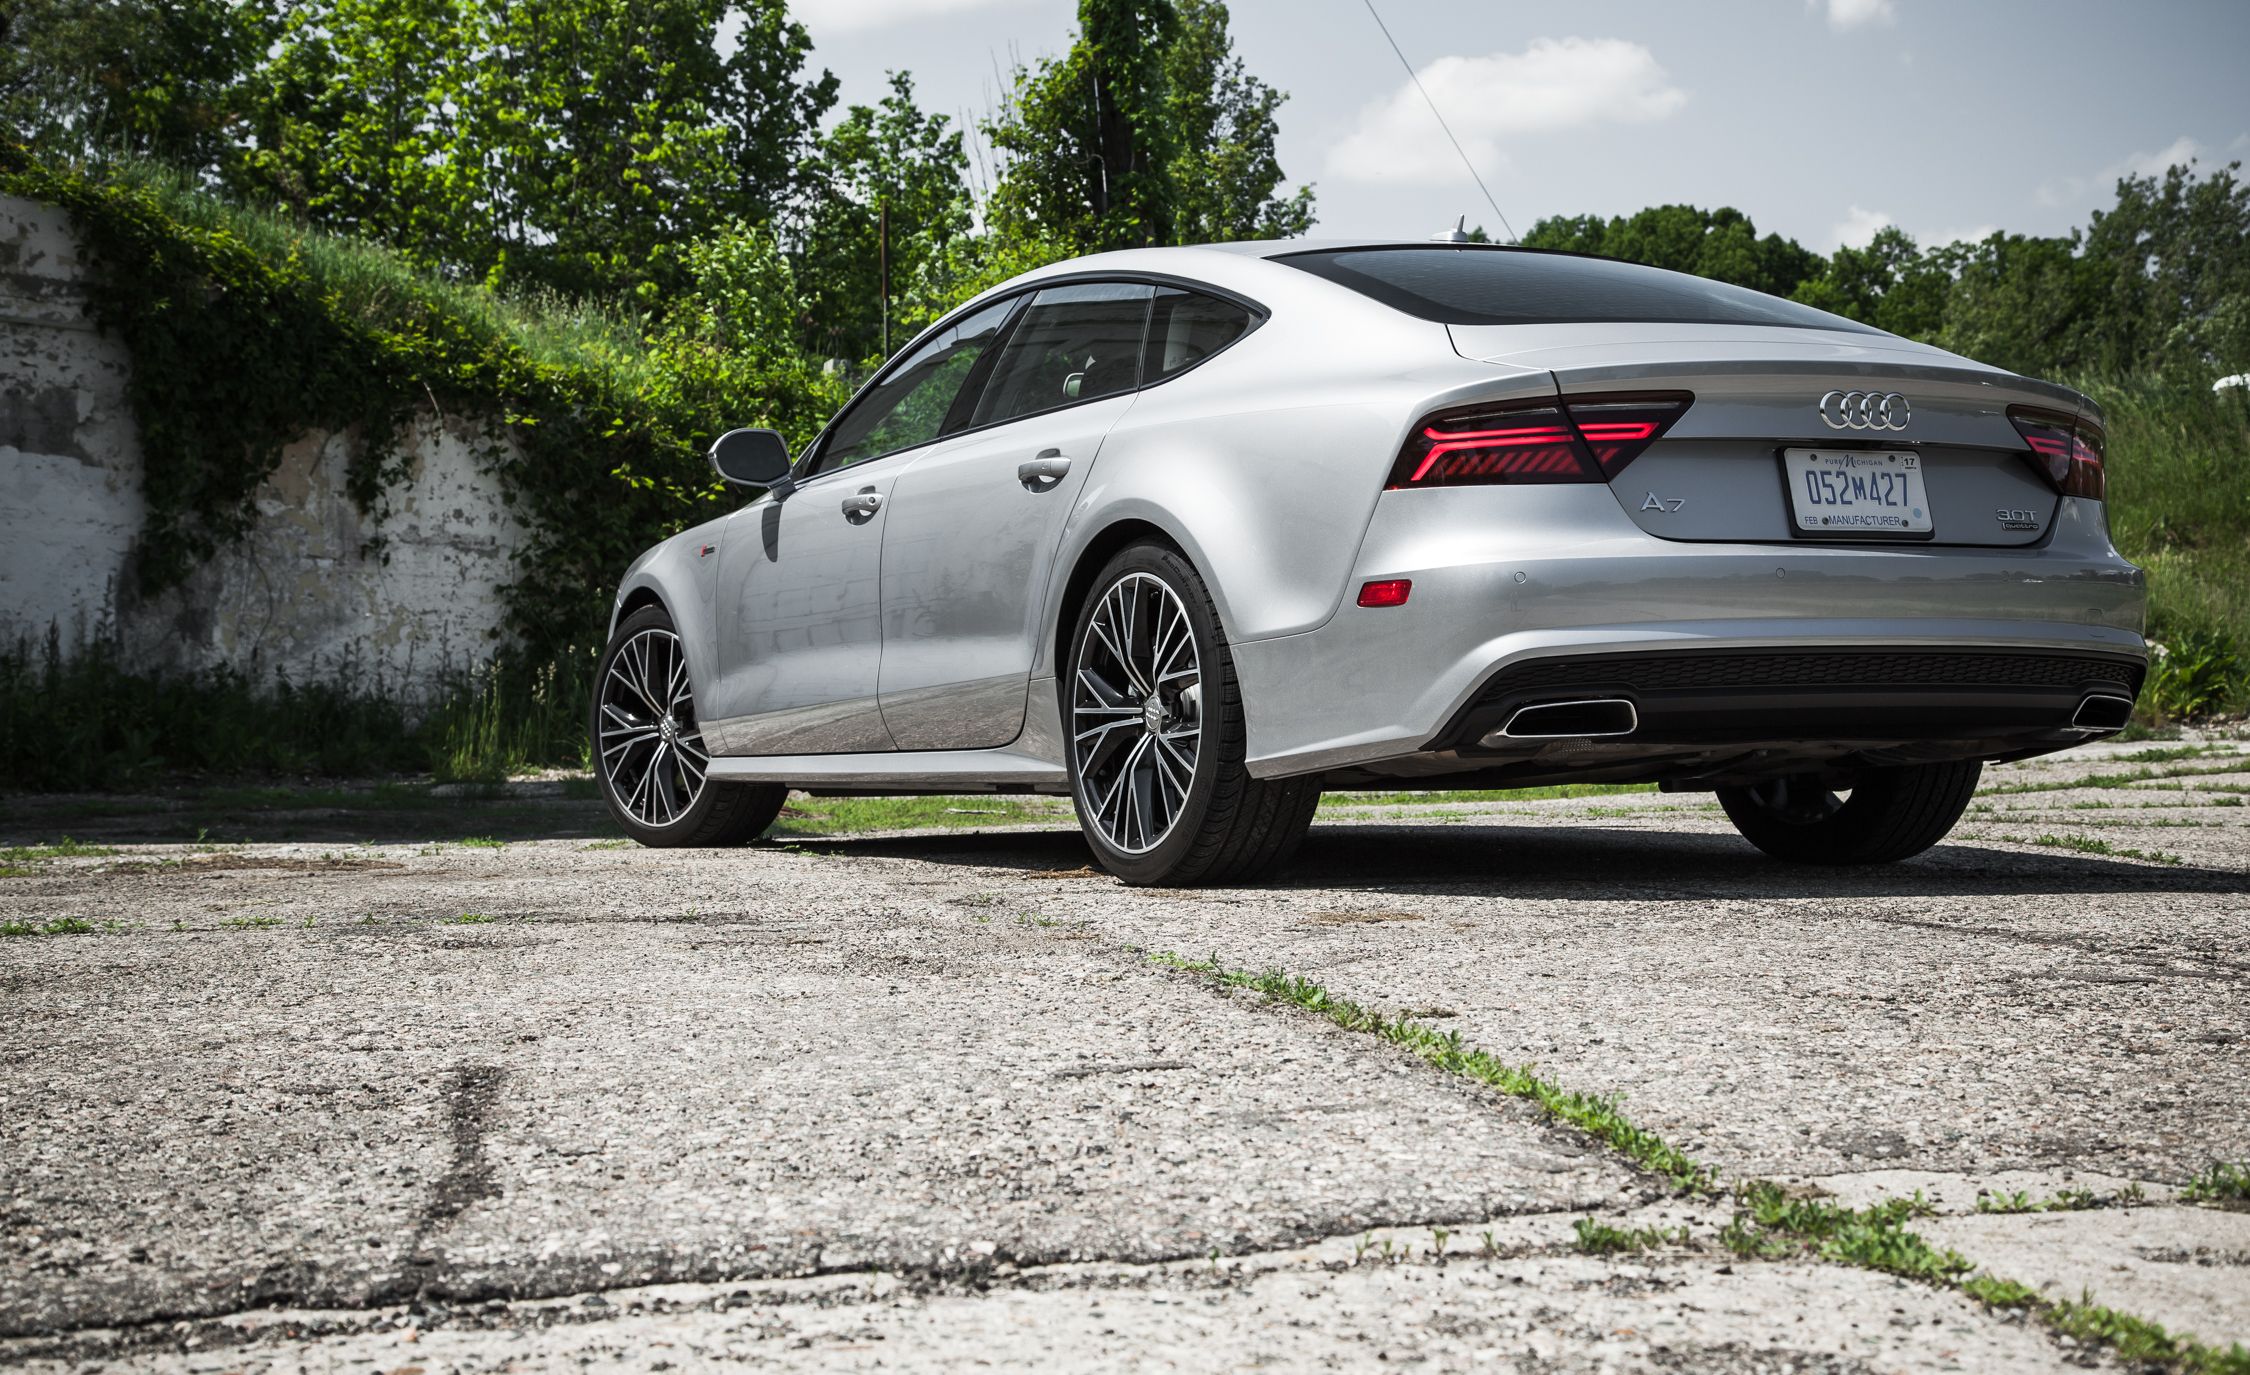 2016 Audi A7 Exterior Rear And Side (View 25 of 26)